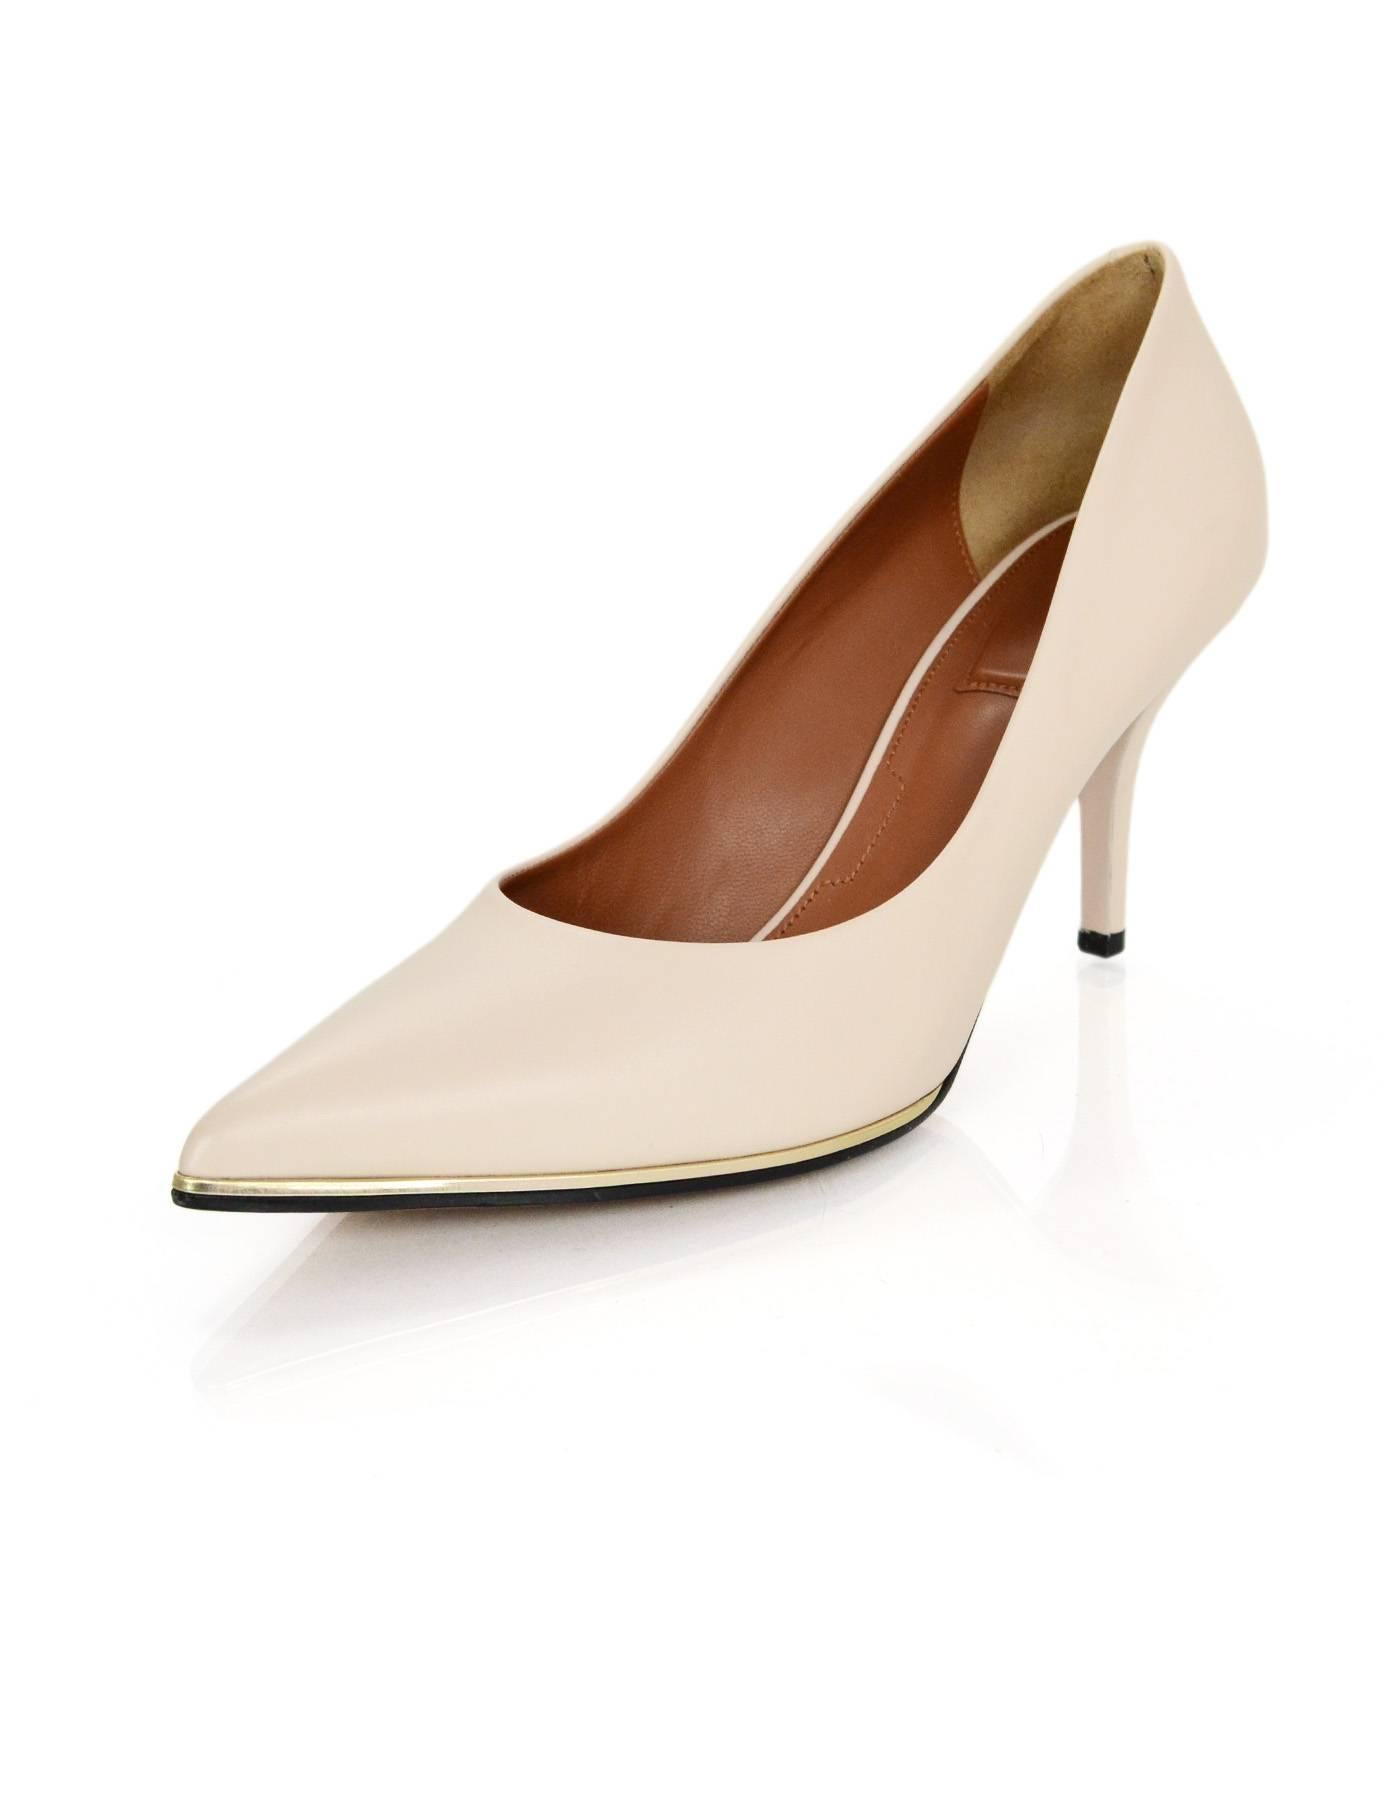 Givenchy Nude Leather Pointed Toe Pumps
Features gold trim at base of shoe

Made In: Italy
Color: Nude
Materials: Leather
Closure: Slide on
Sole Stamp: Givenchy Paris Made in Italy 39
Retail Price: $650 + tax
Overall Condition: Excellent pre-owned